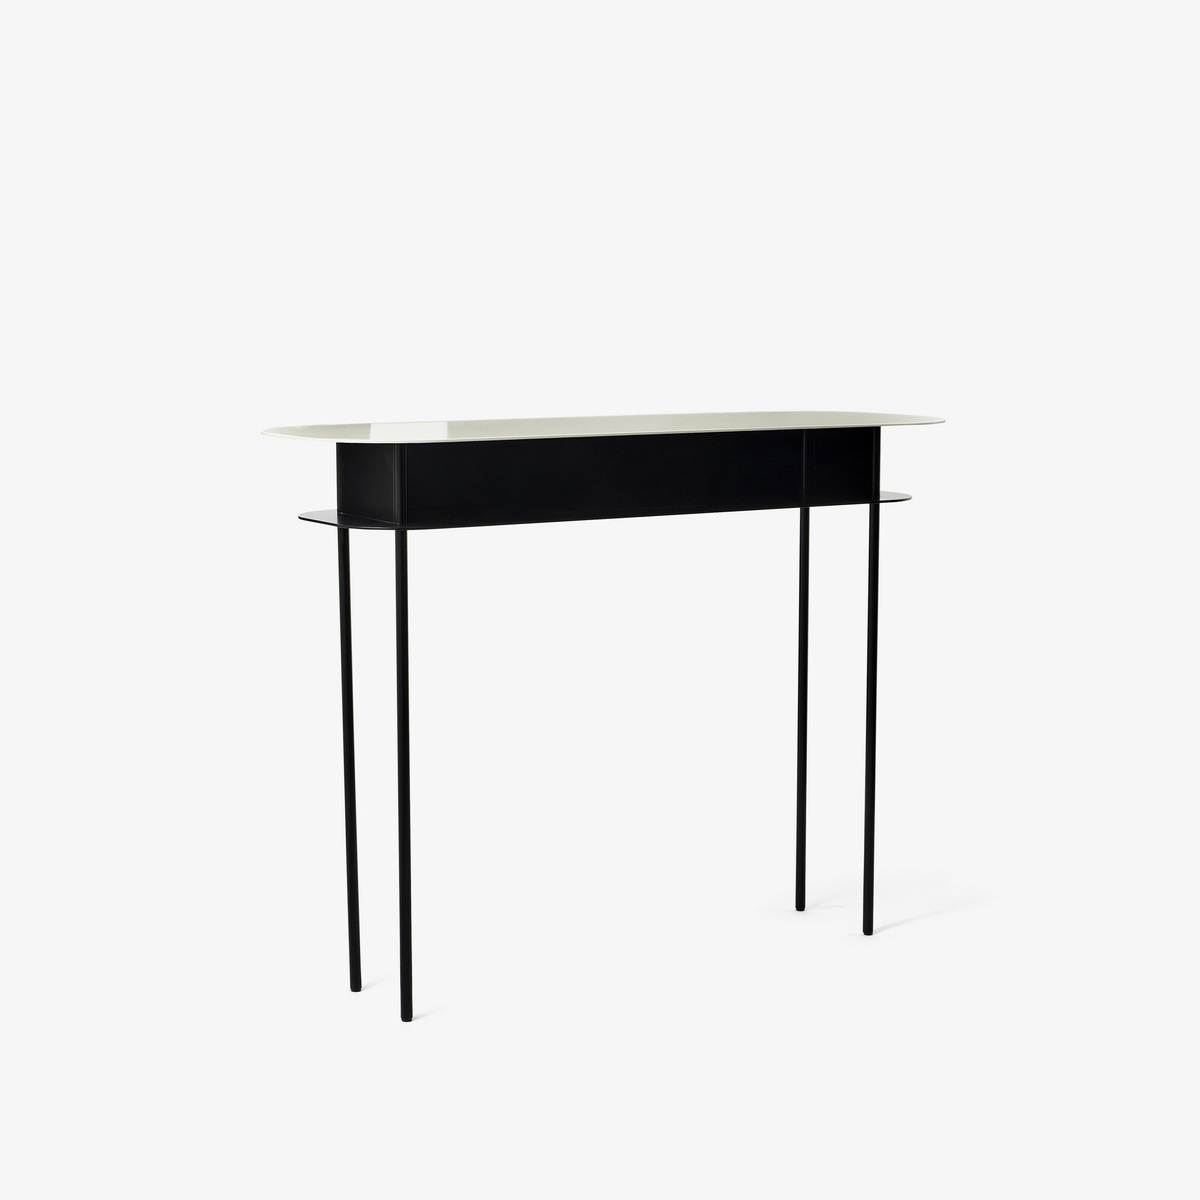 Console Table Tokyo, Off-White/Black - 110 x 40 x 85 cm - Powder coated steel - image 3